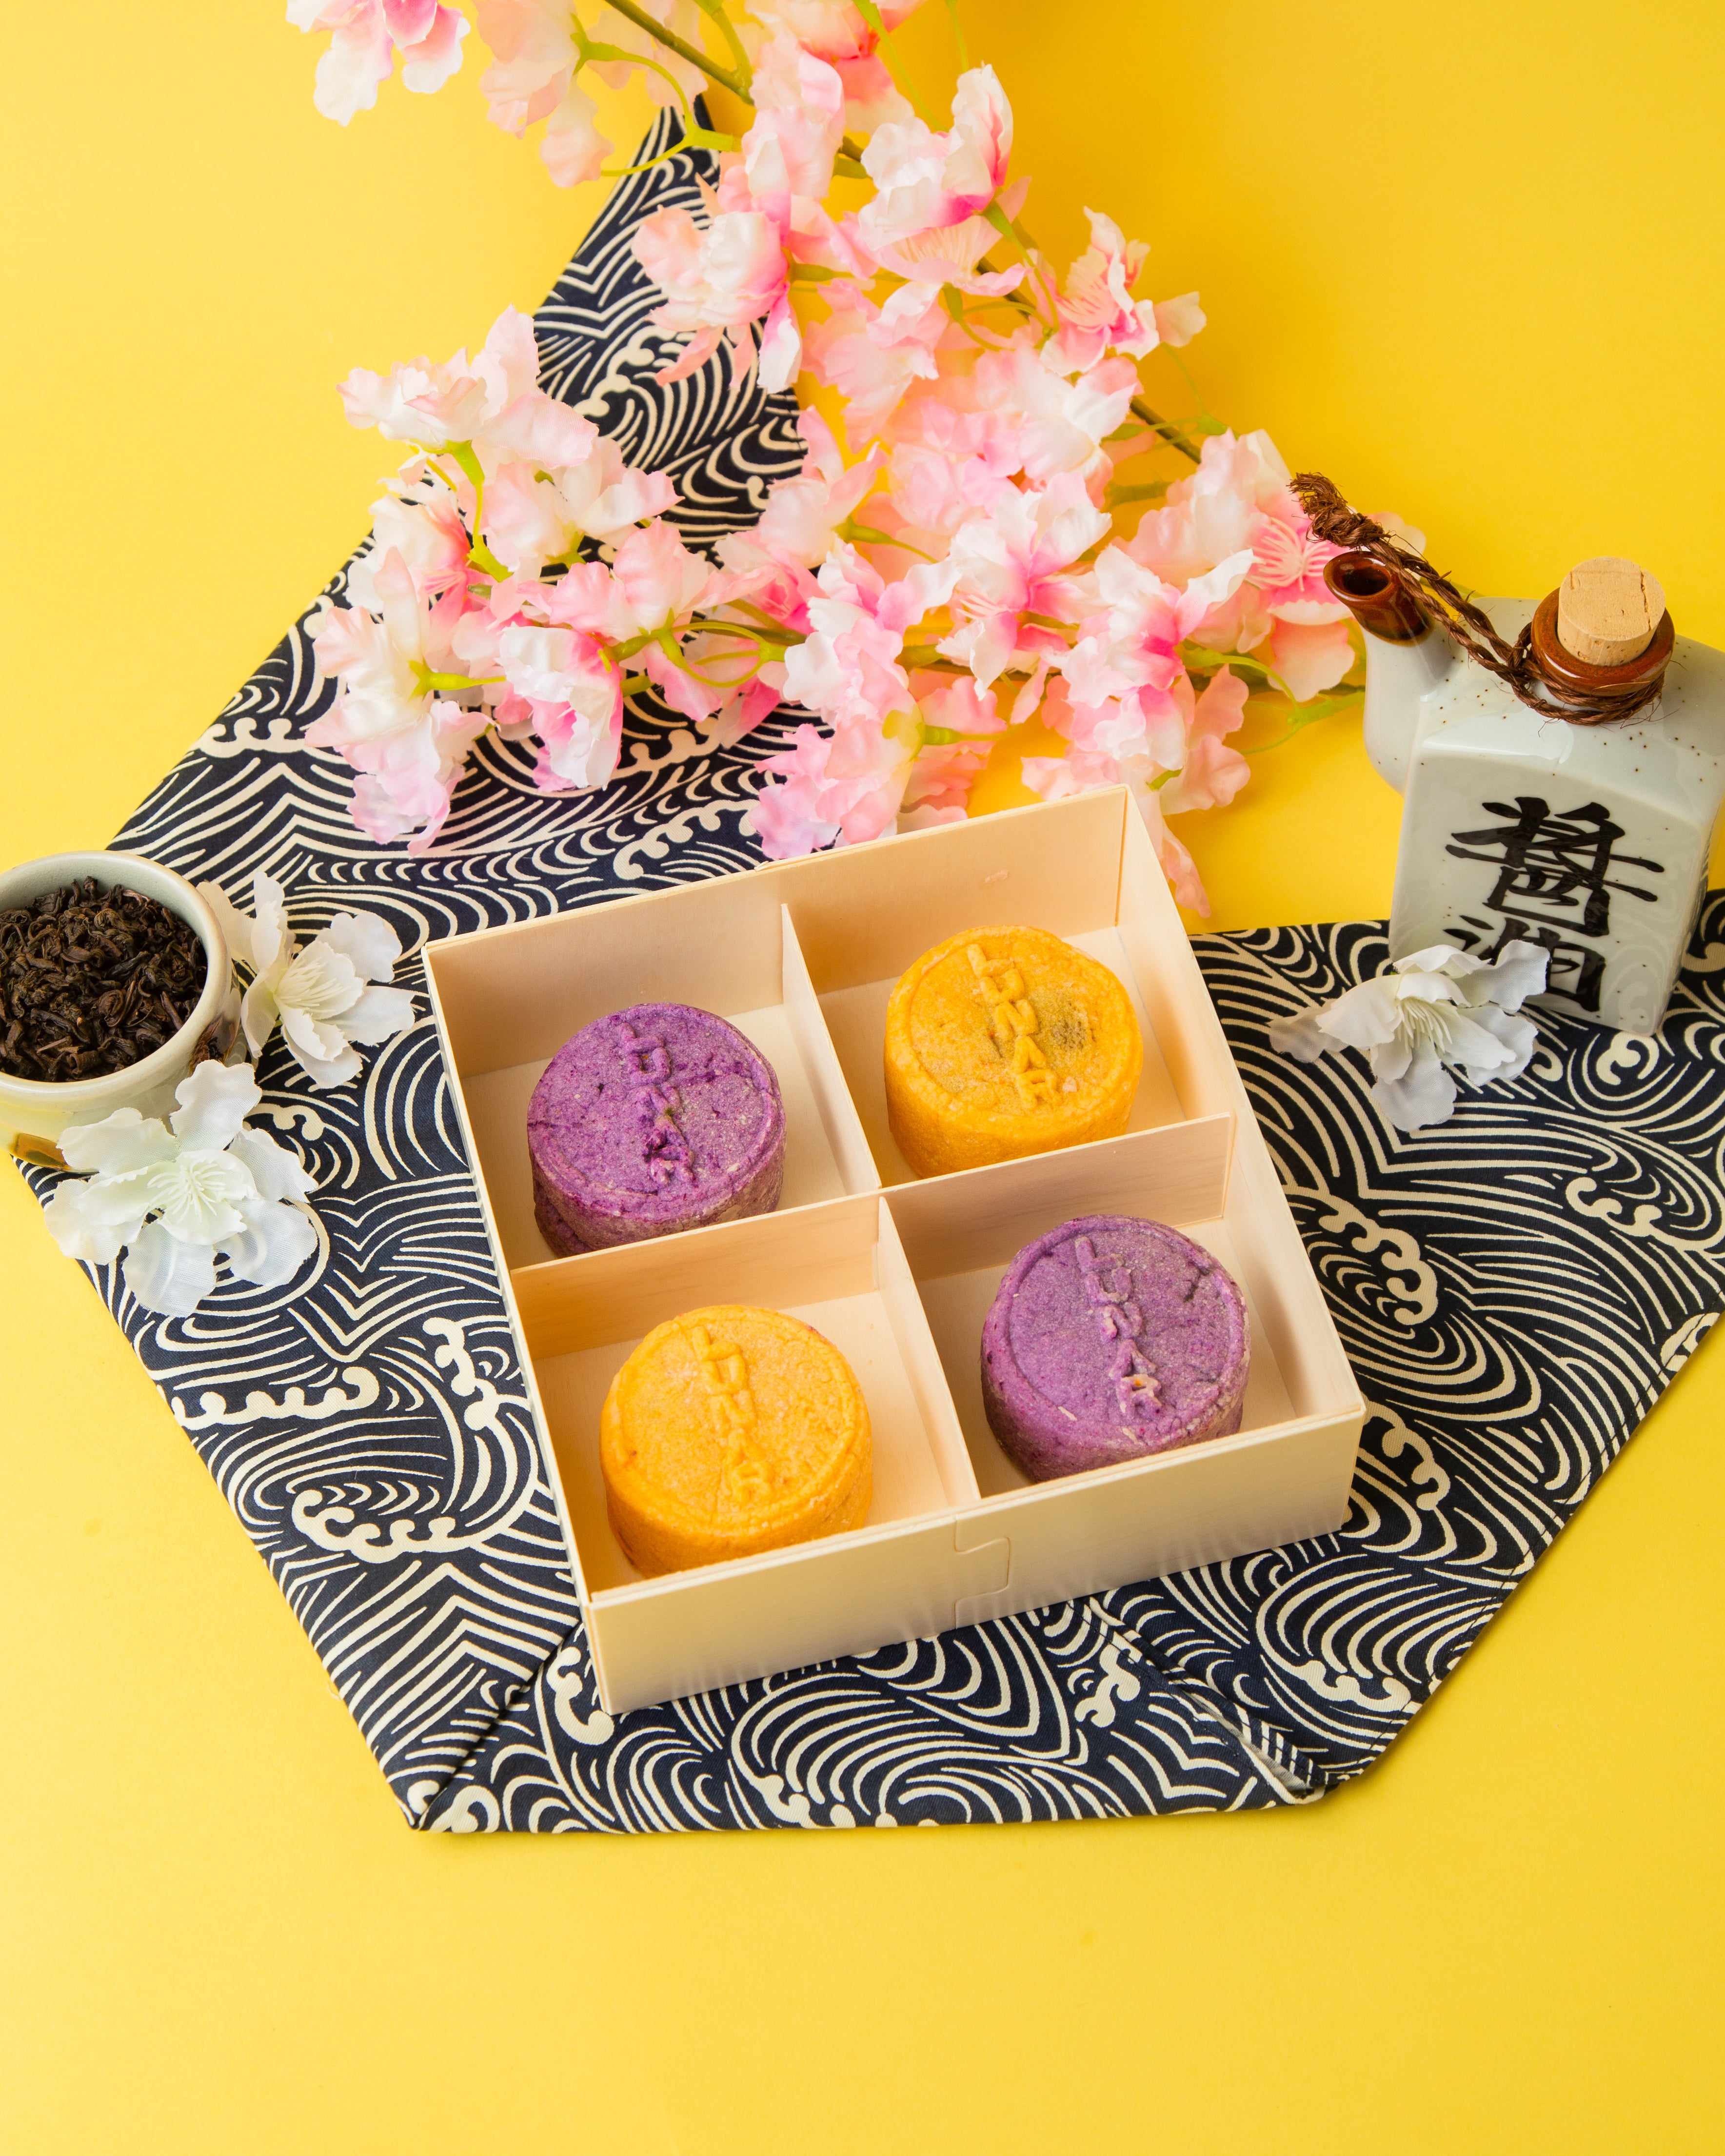 8 luxurious mooncakes gift sets you need this Mid-Autumn Festival 2022